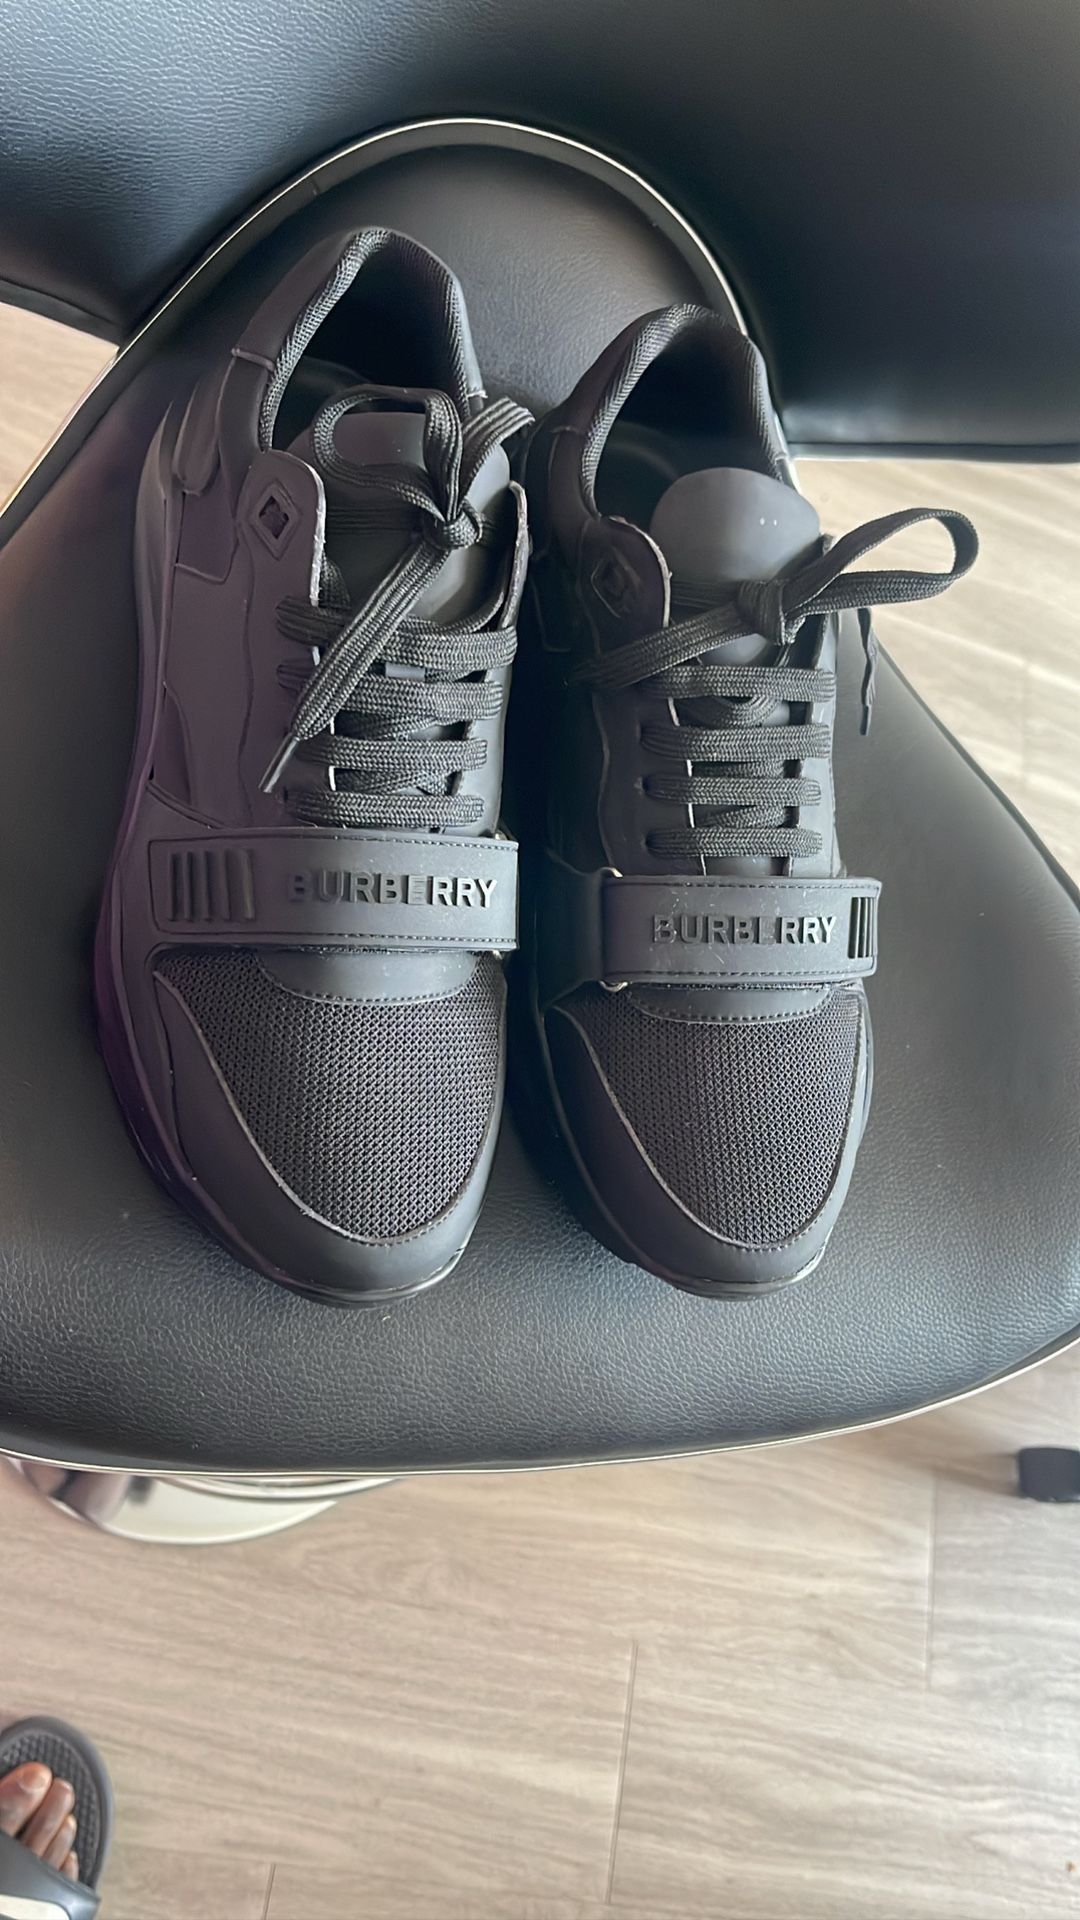 Burberry Trainers Size 10